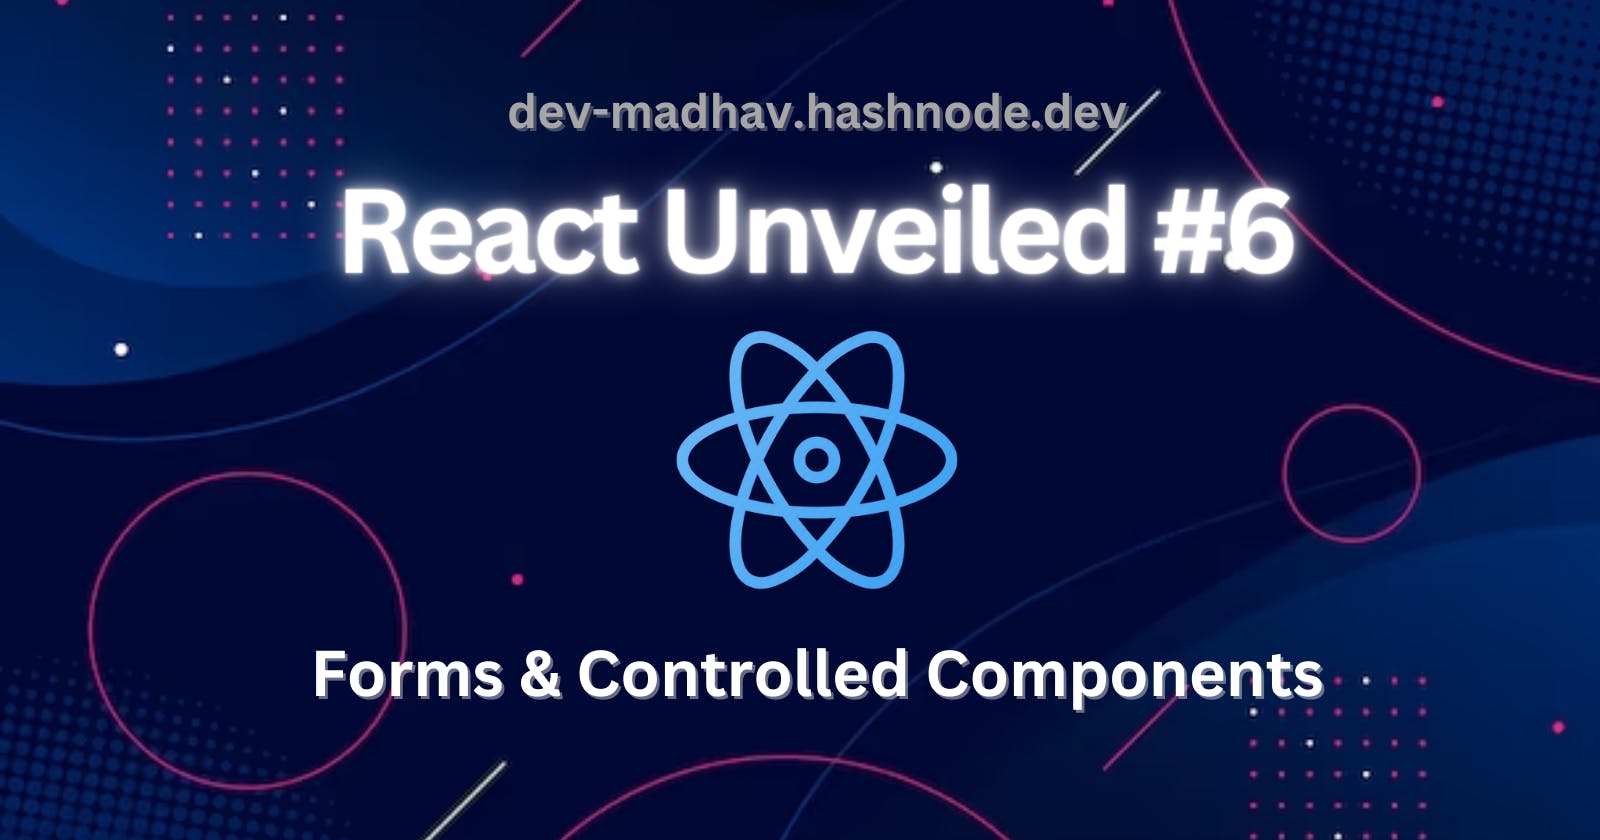 React Unveiled #6 - Forms & Controlled Components